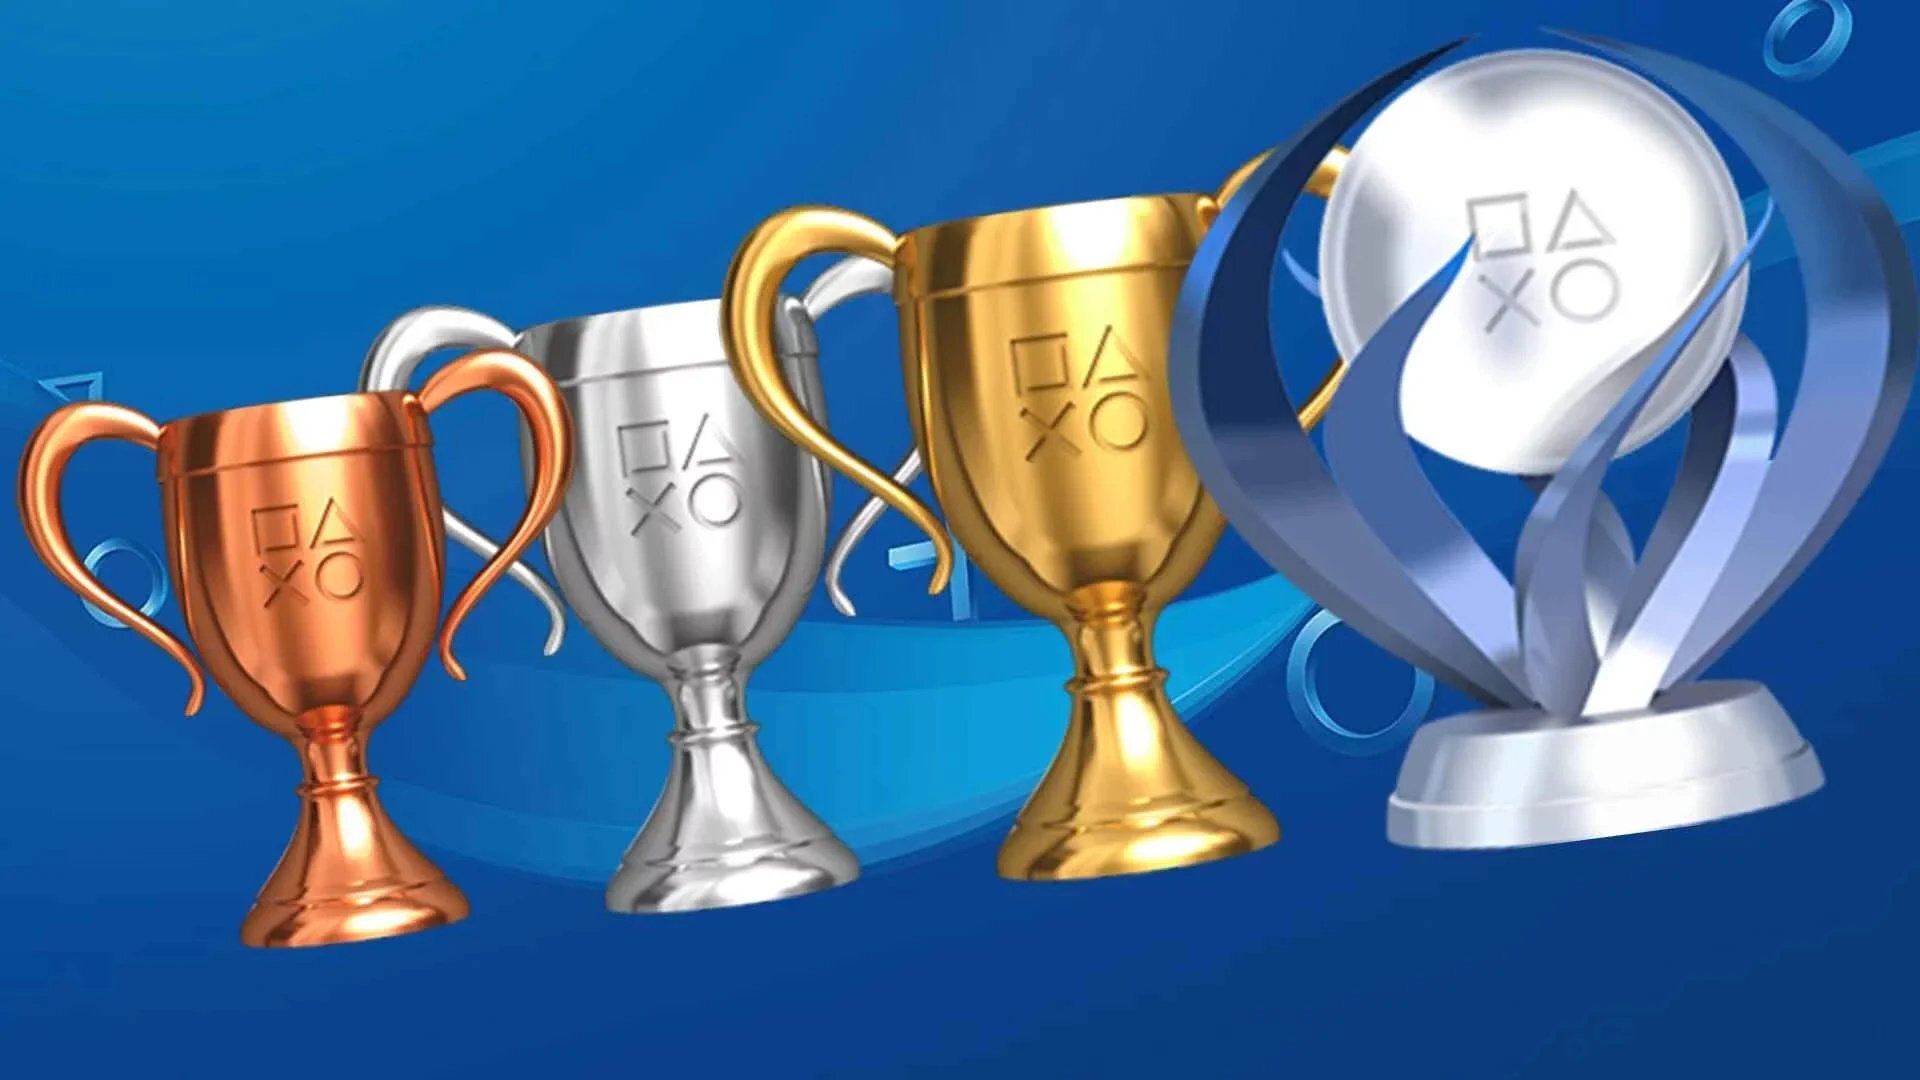 PS5 Trophies: You Need to Know Digital Trends